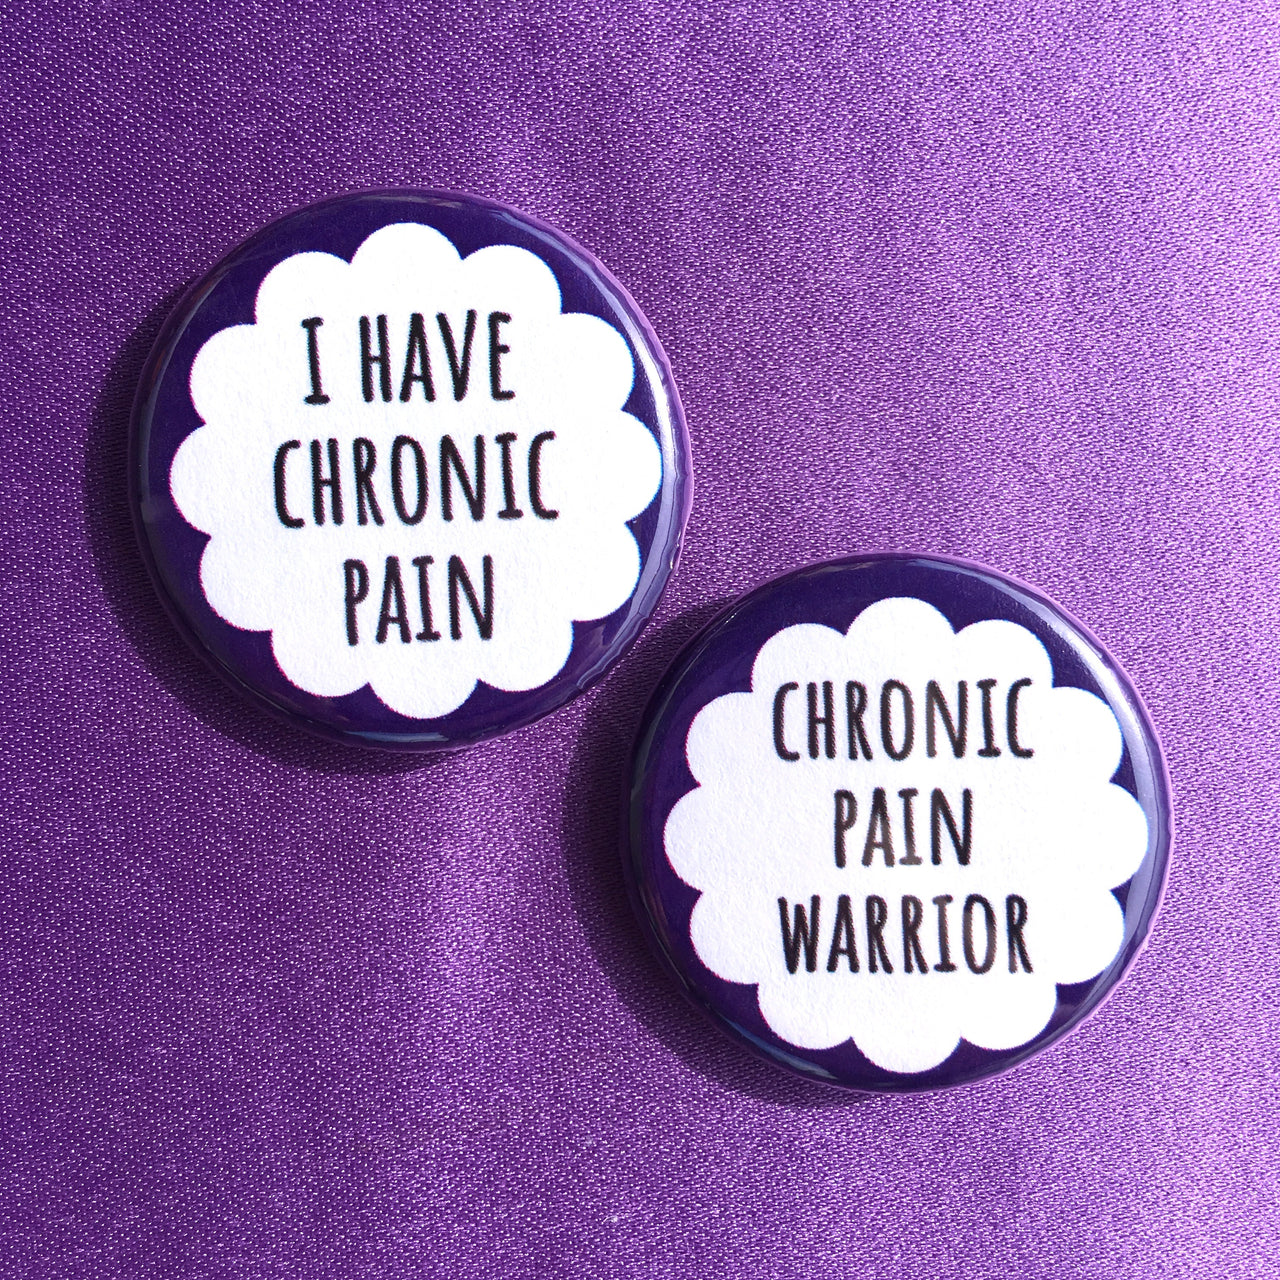 Chronic pain buttons - Radical Buttons